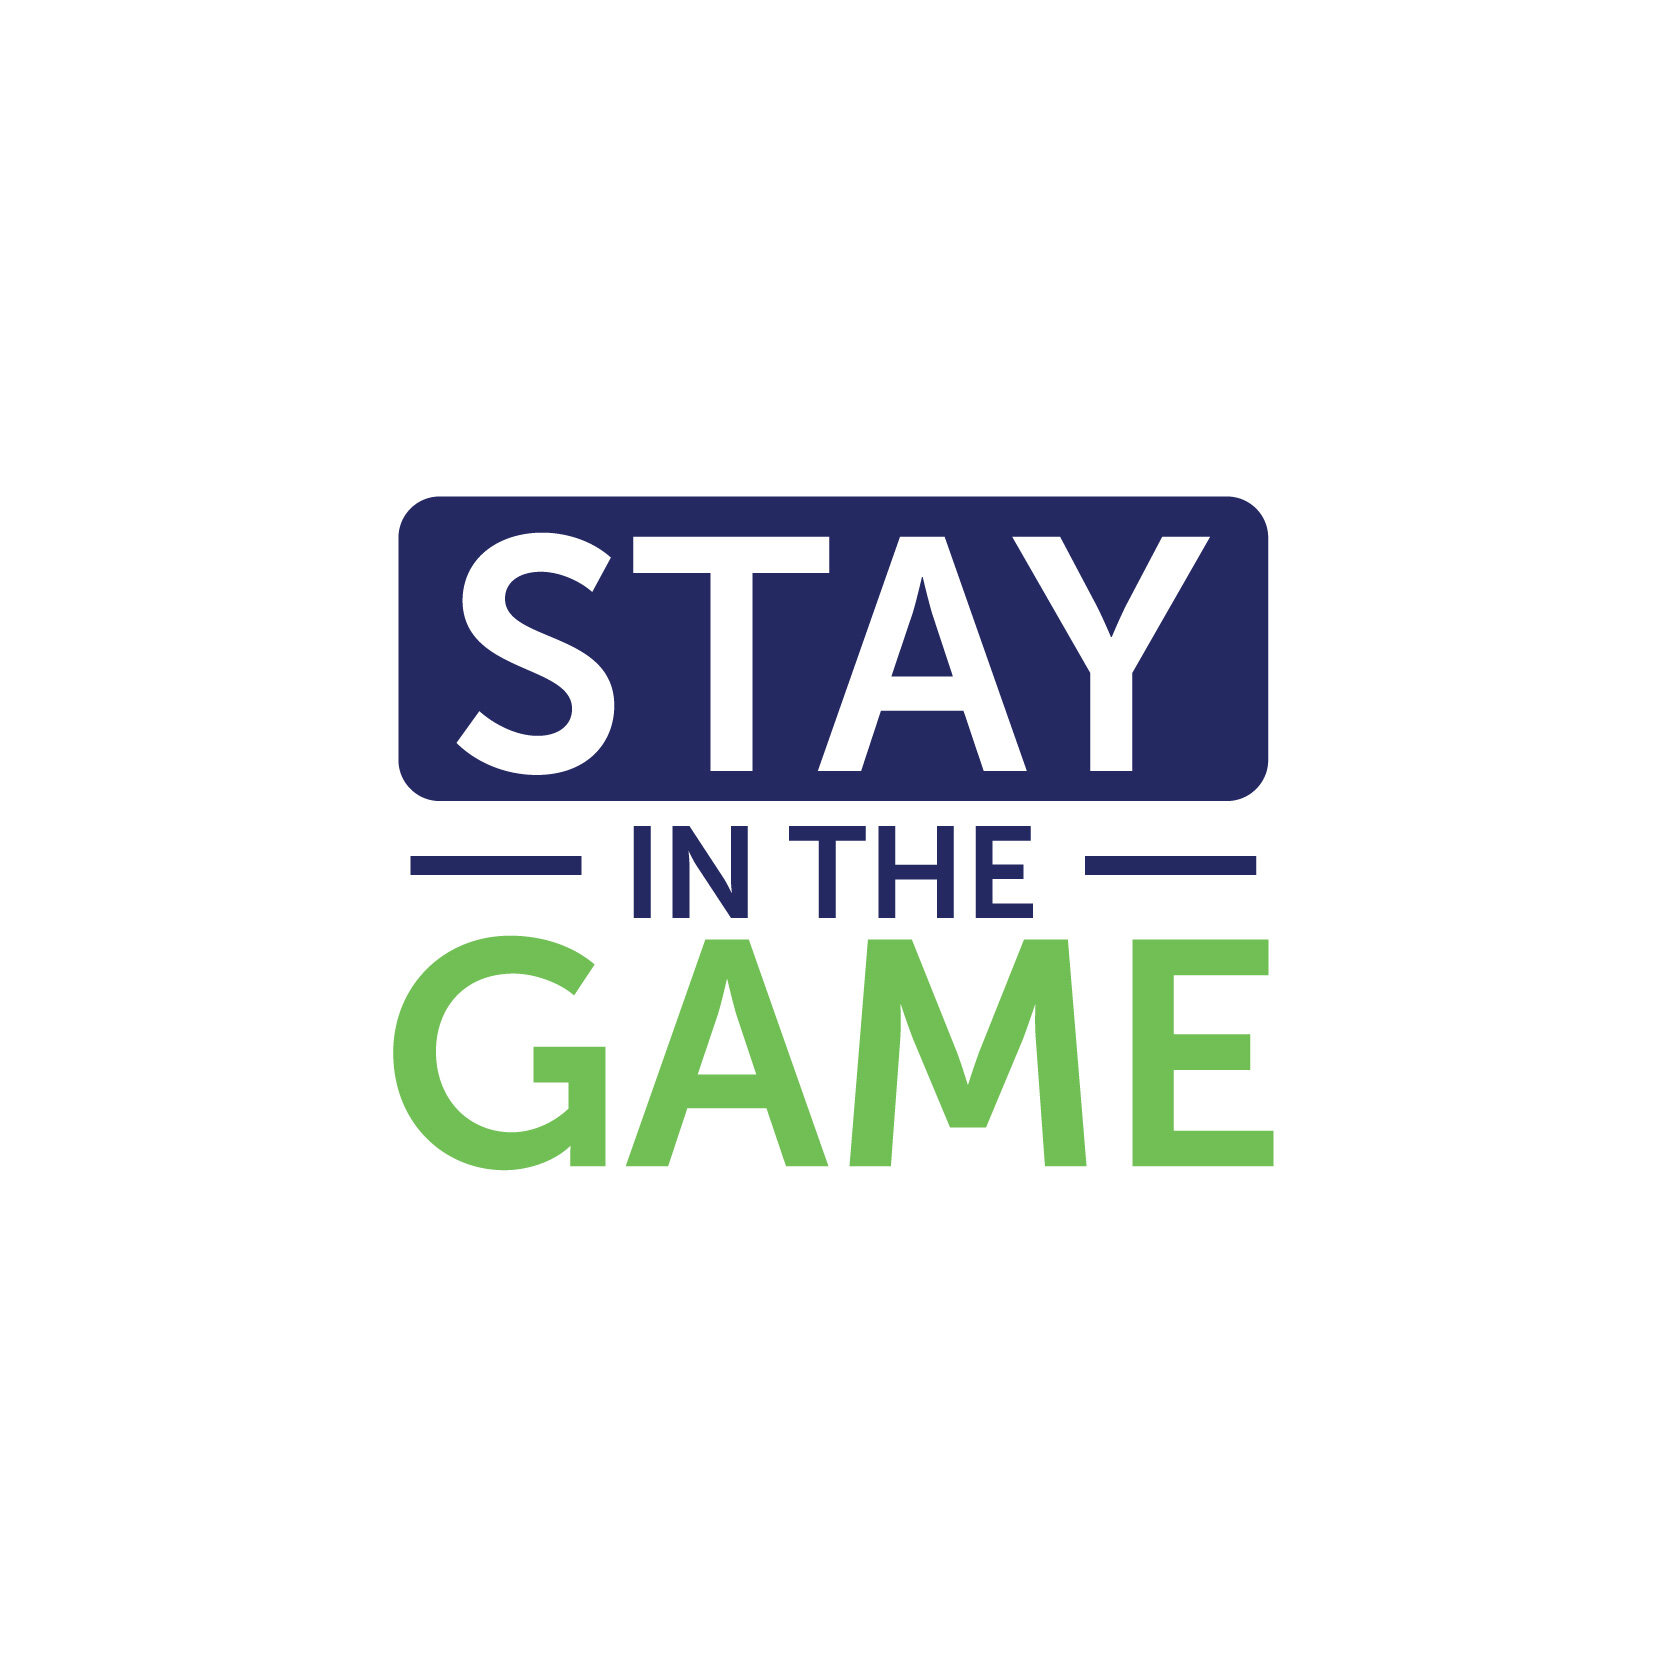 Copy of stay in the game-02.jpg